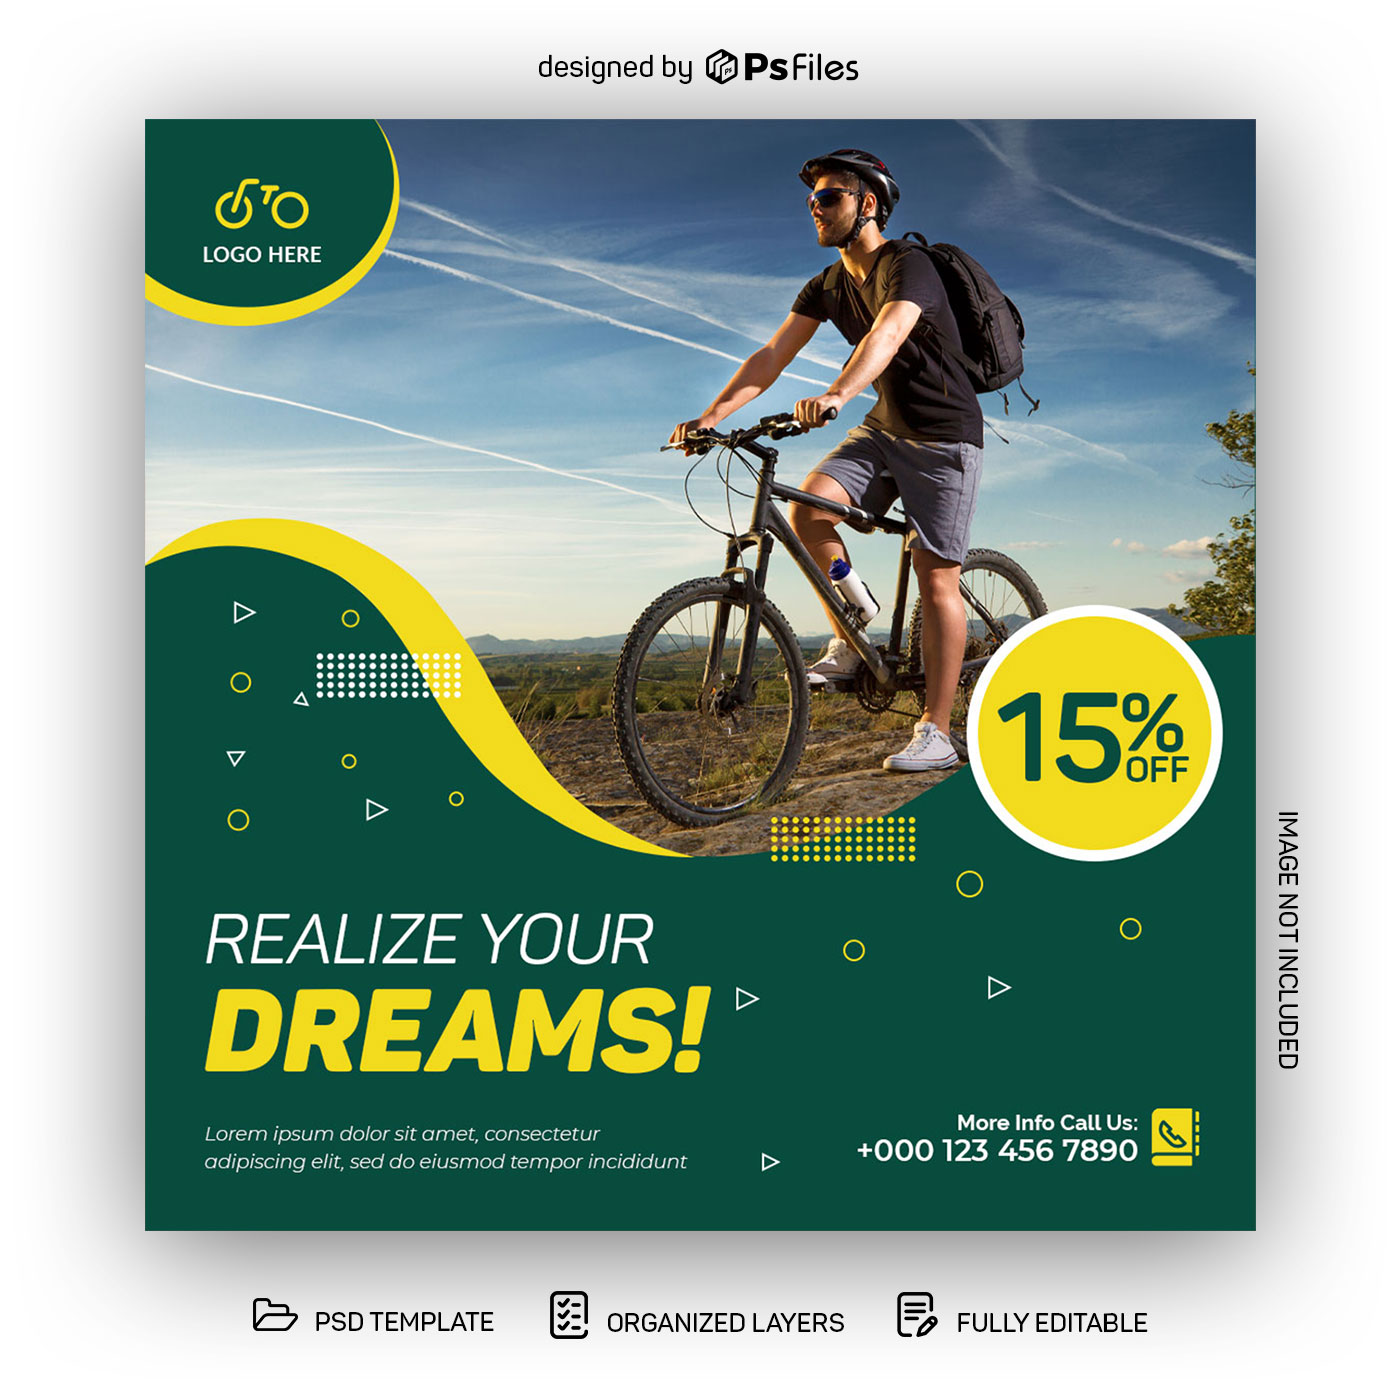 Green Color Cycle store offer sale Post design PSD template for social media pages